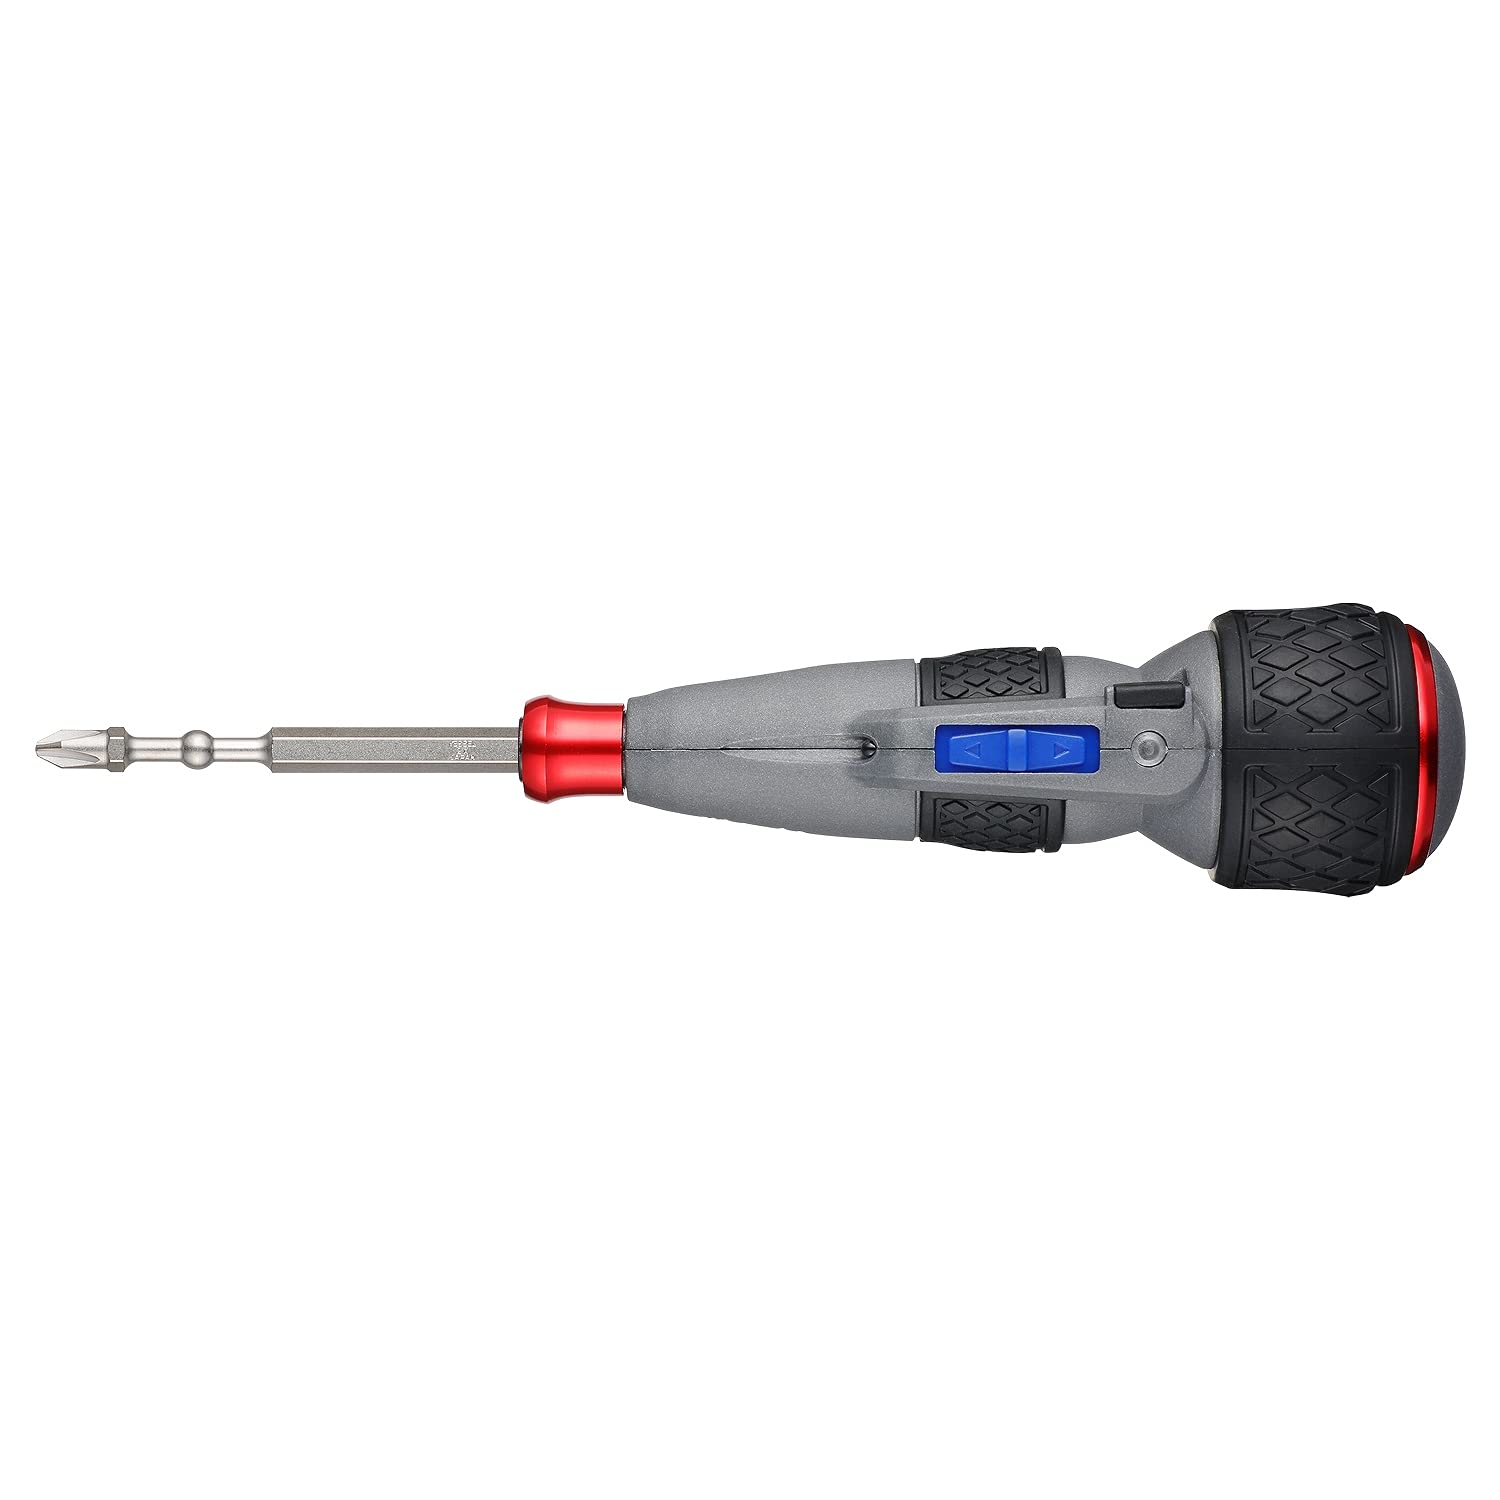 BALL GRIP Rechargeable Screwdriver Cordless (High Speed) No.220USB-S1U 220USBS1U Made in Japan by VESSEL